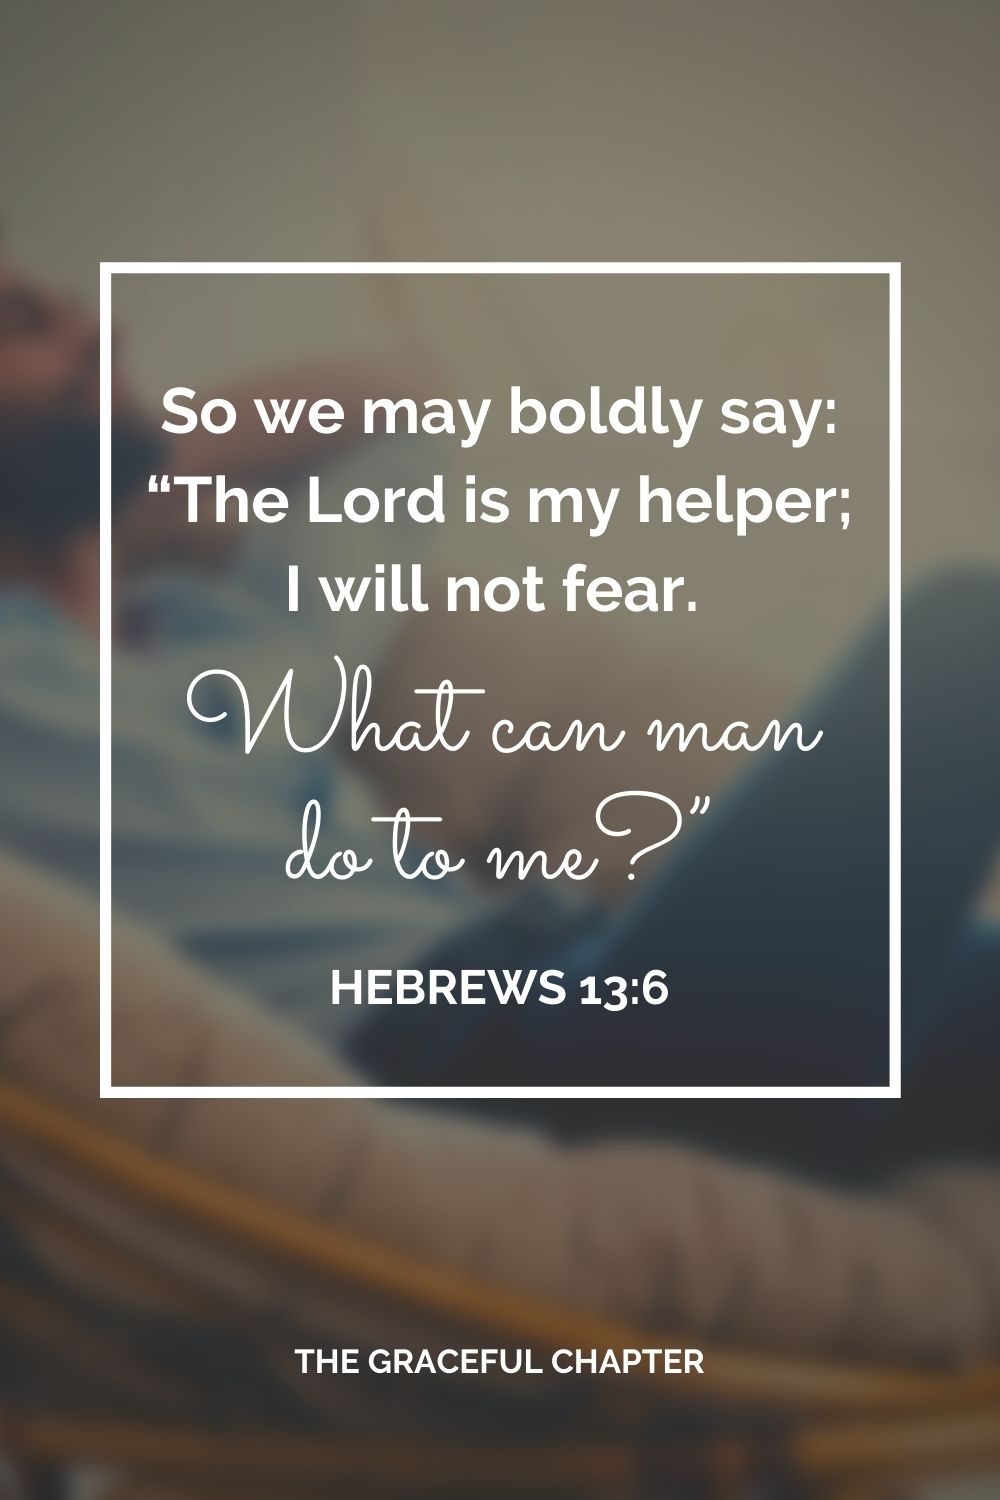 So we may boldly say: “The Lord is my helper; I will not fear. What can man do to me?” Hebrews 13:6